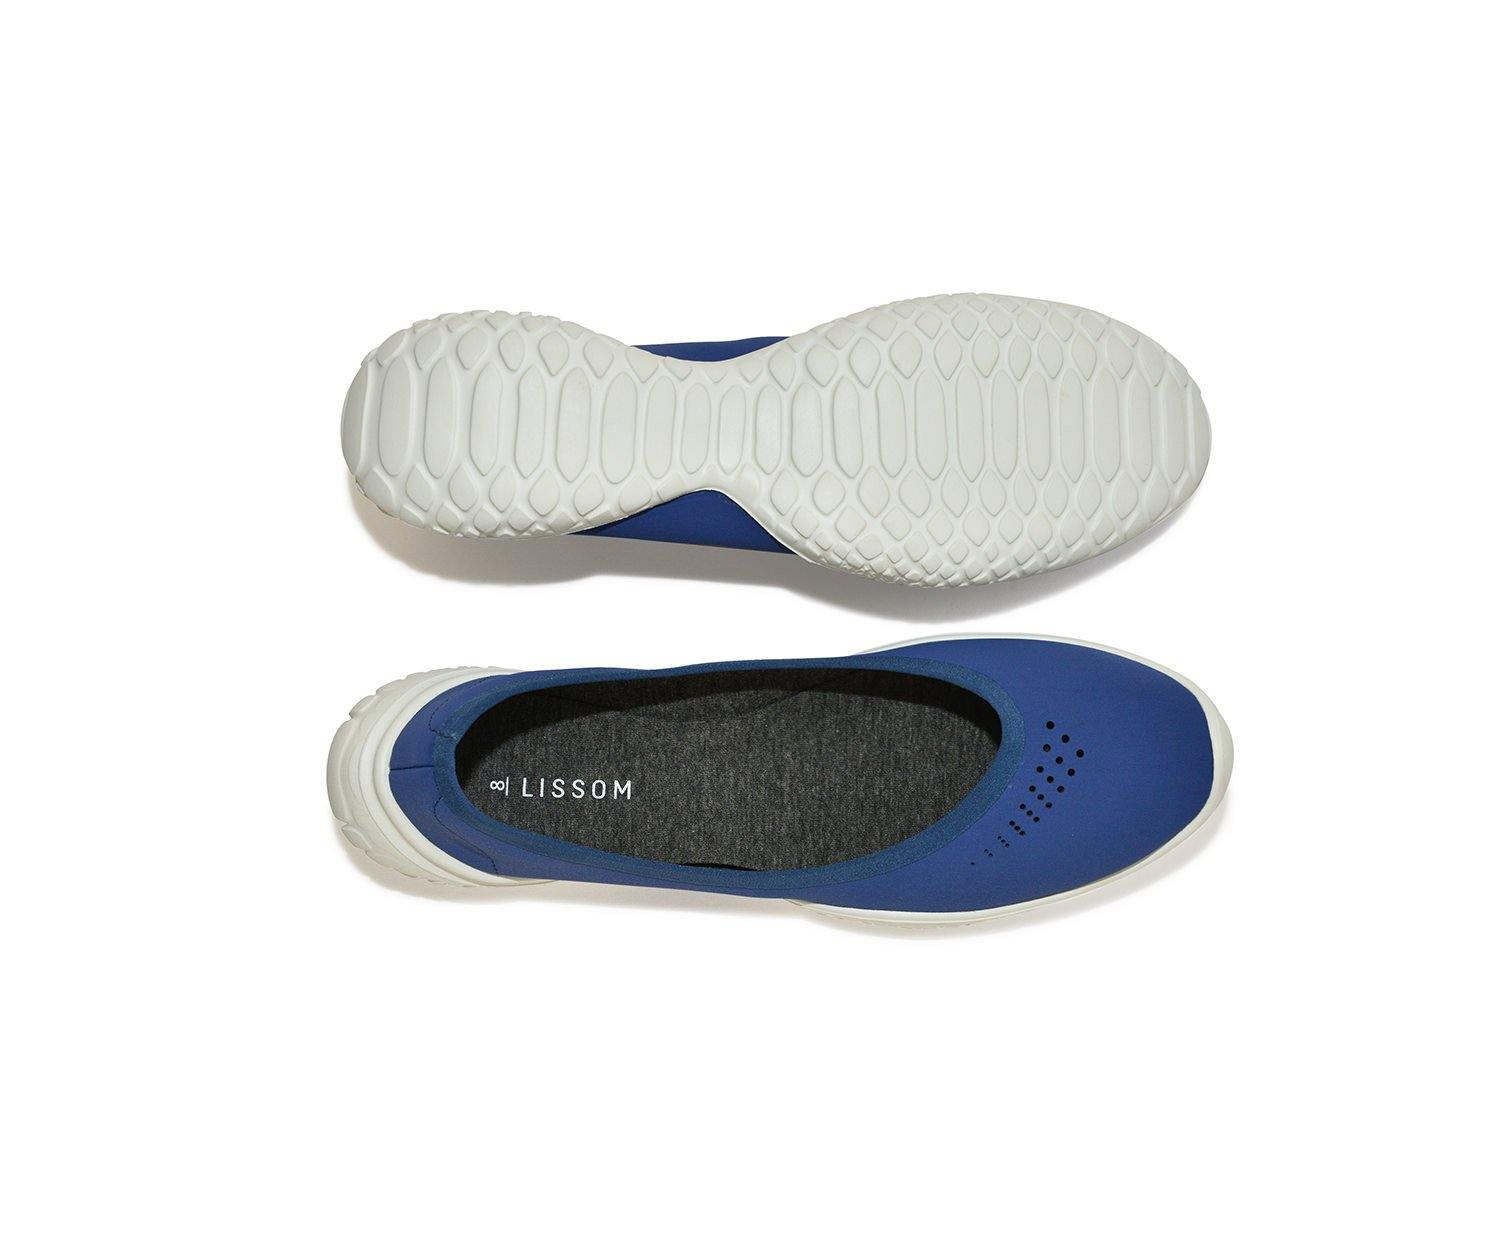 Flyte Blue - LISSOM - shoes for standing all day